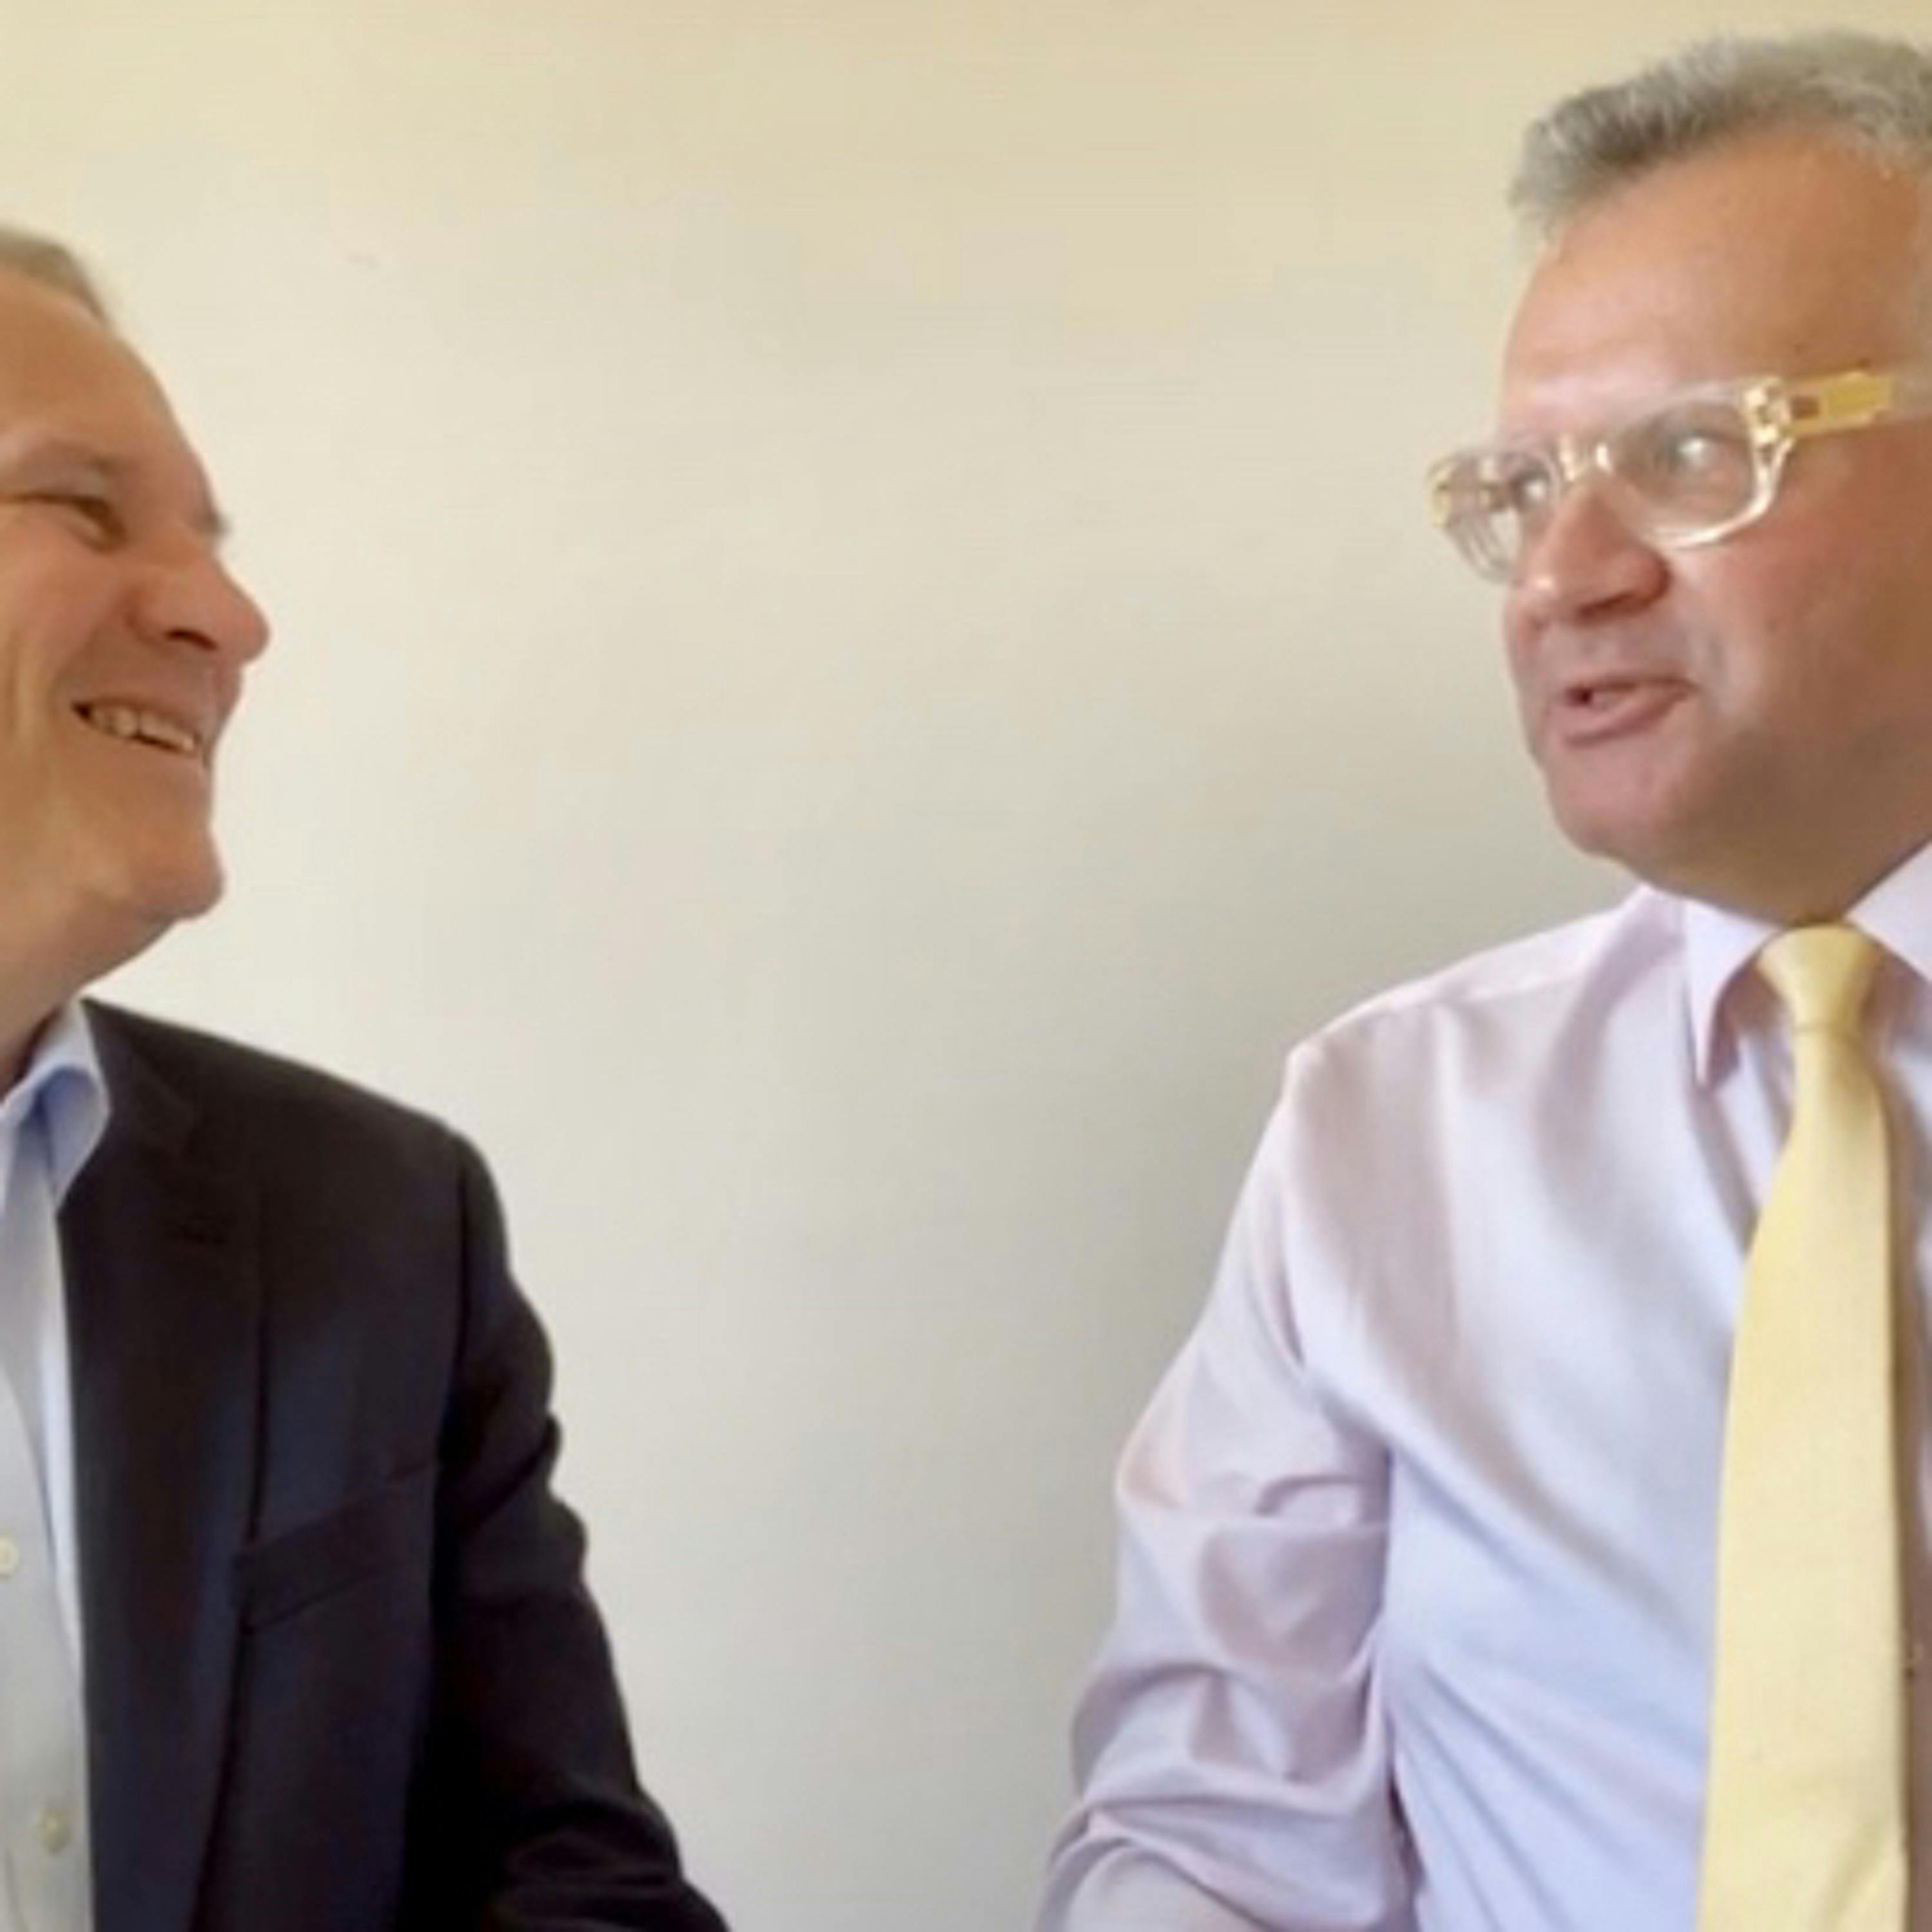 22: Col. Richard Kemp OBE: fighting evil becomes personal